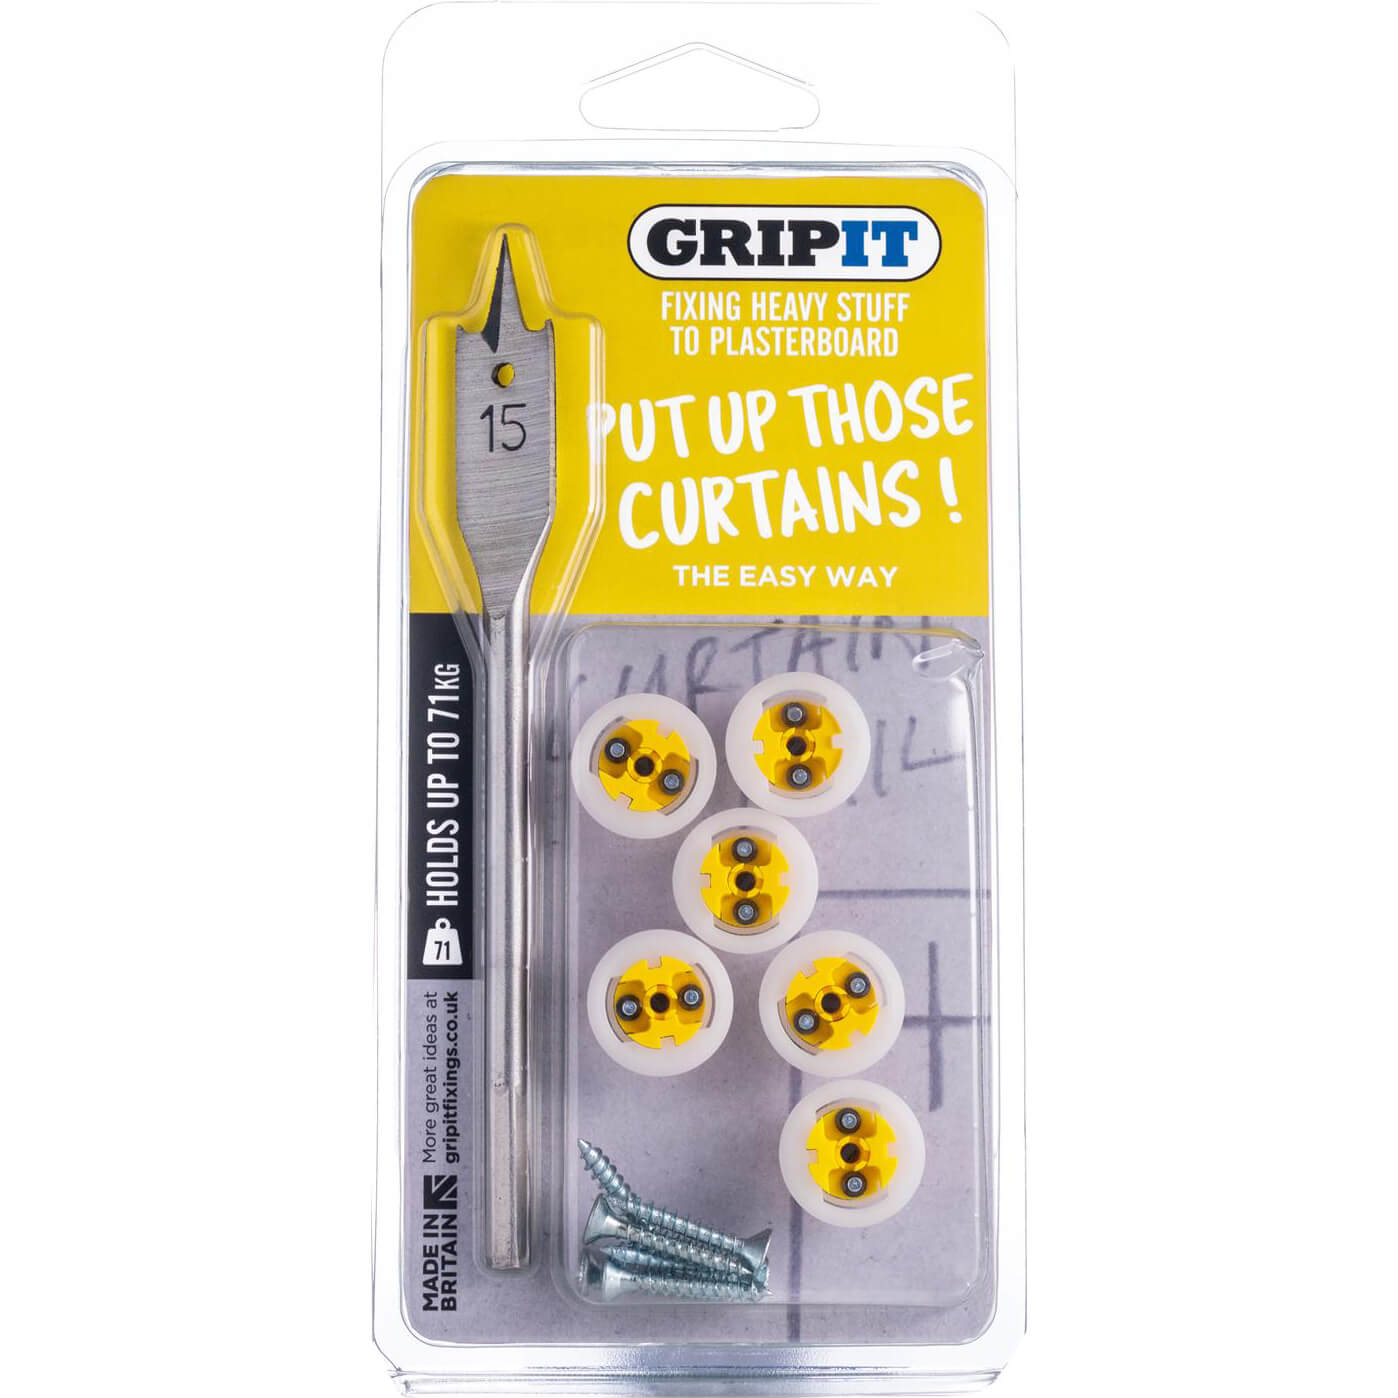 Photo of Gripit Complete Plasterboard Curtain Rail Mounting Kit